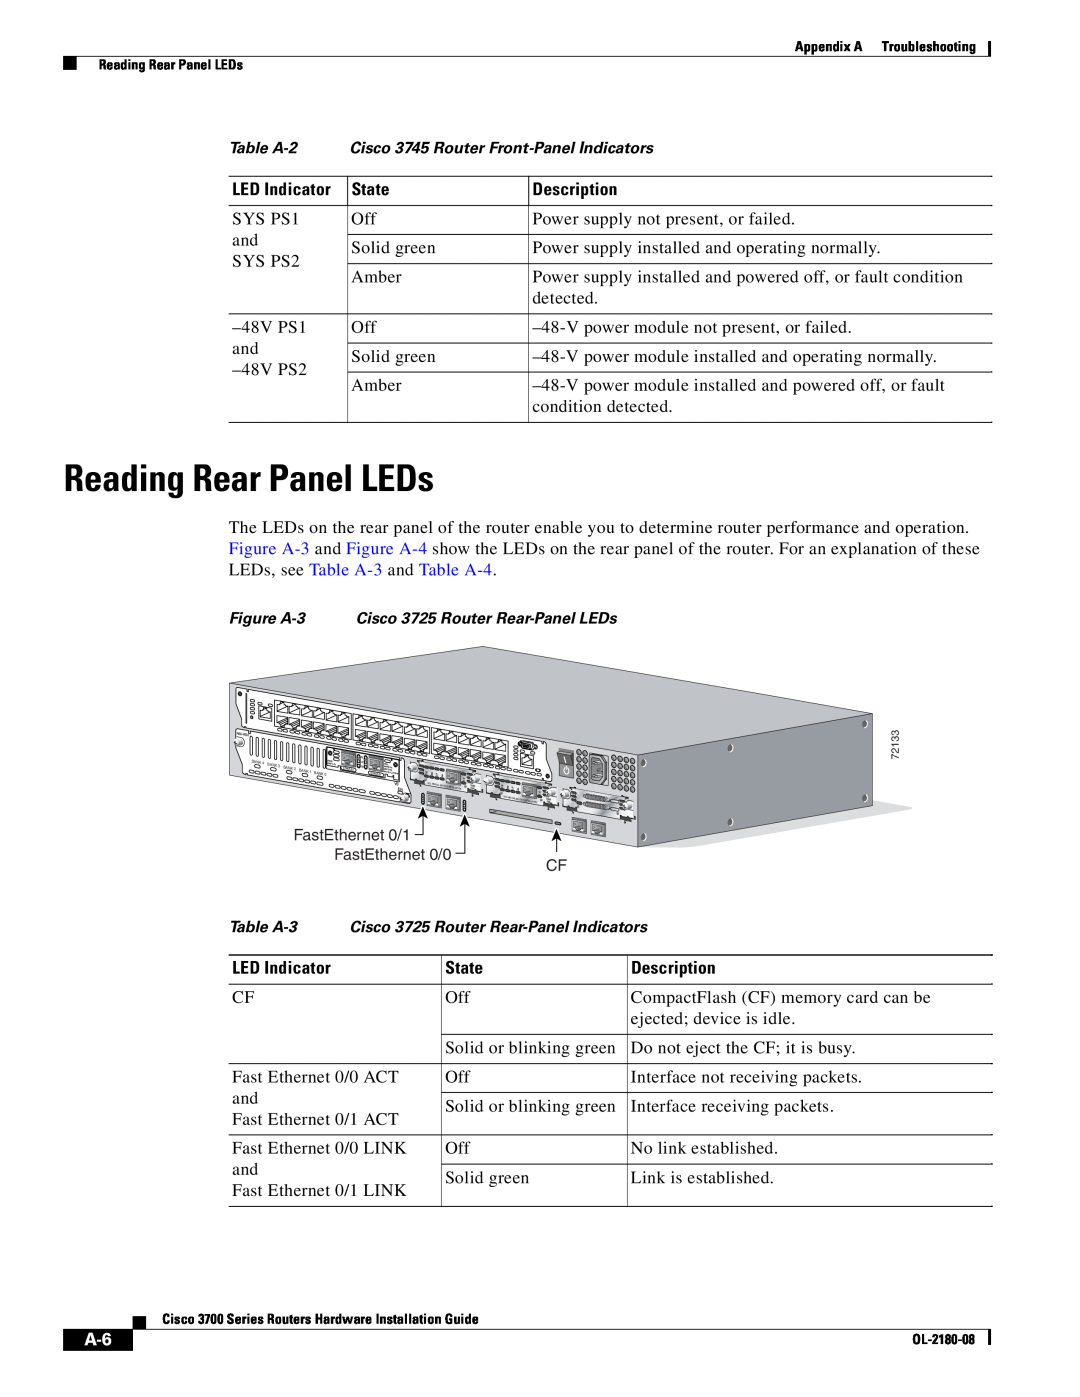 Cisco Systems 3700 Series manual Reading Rear Panel LEDs 